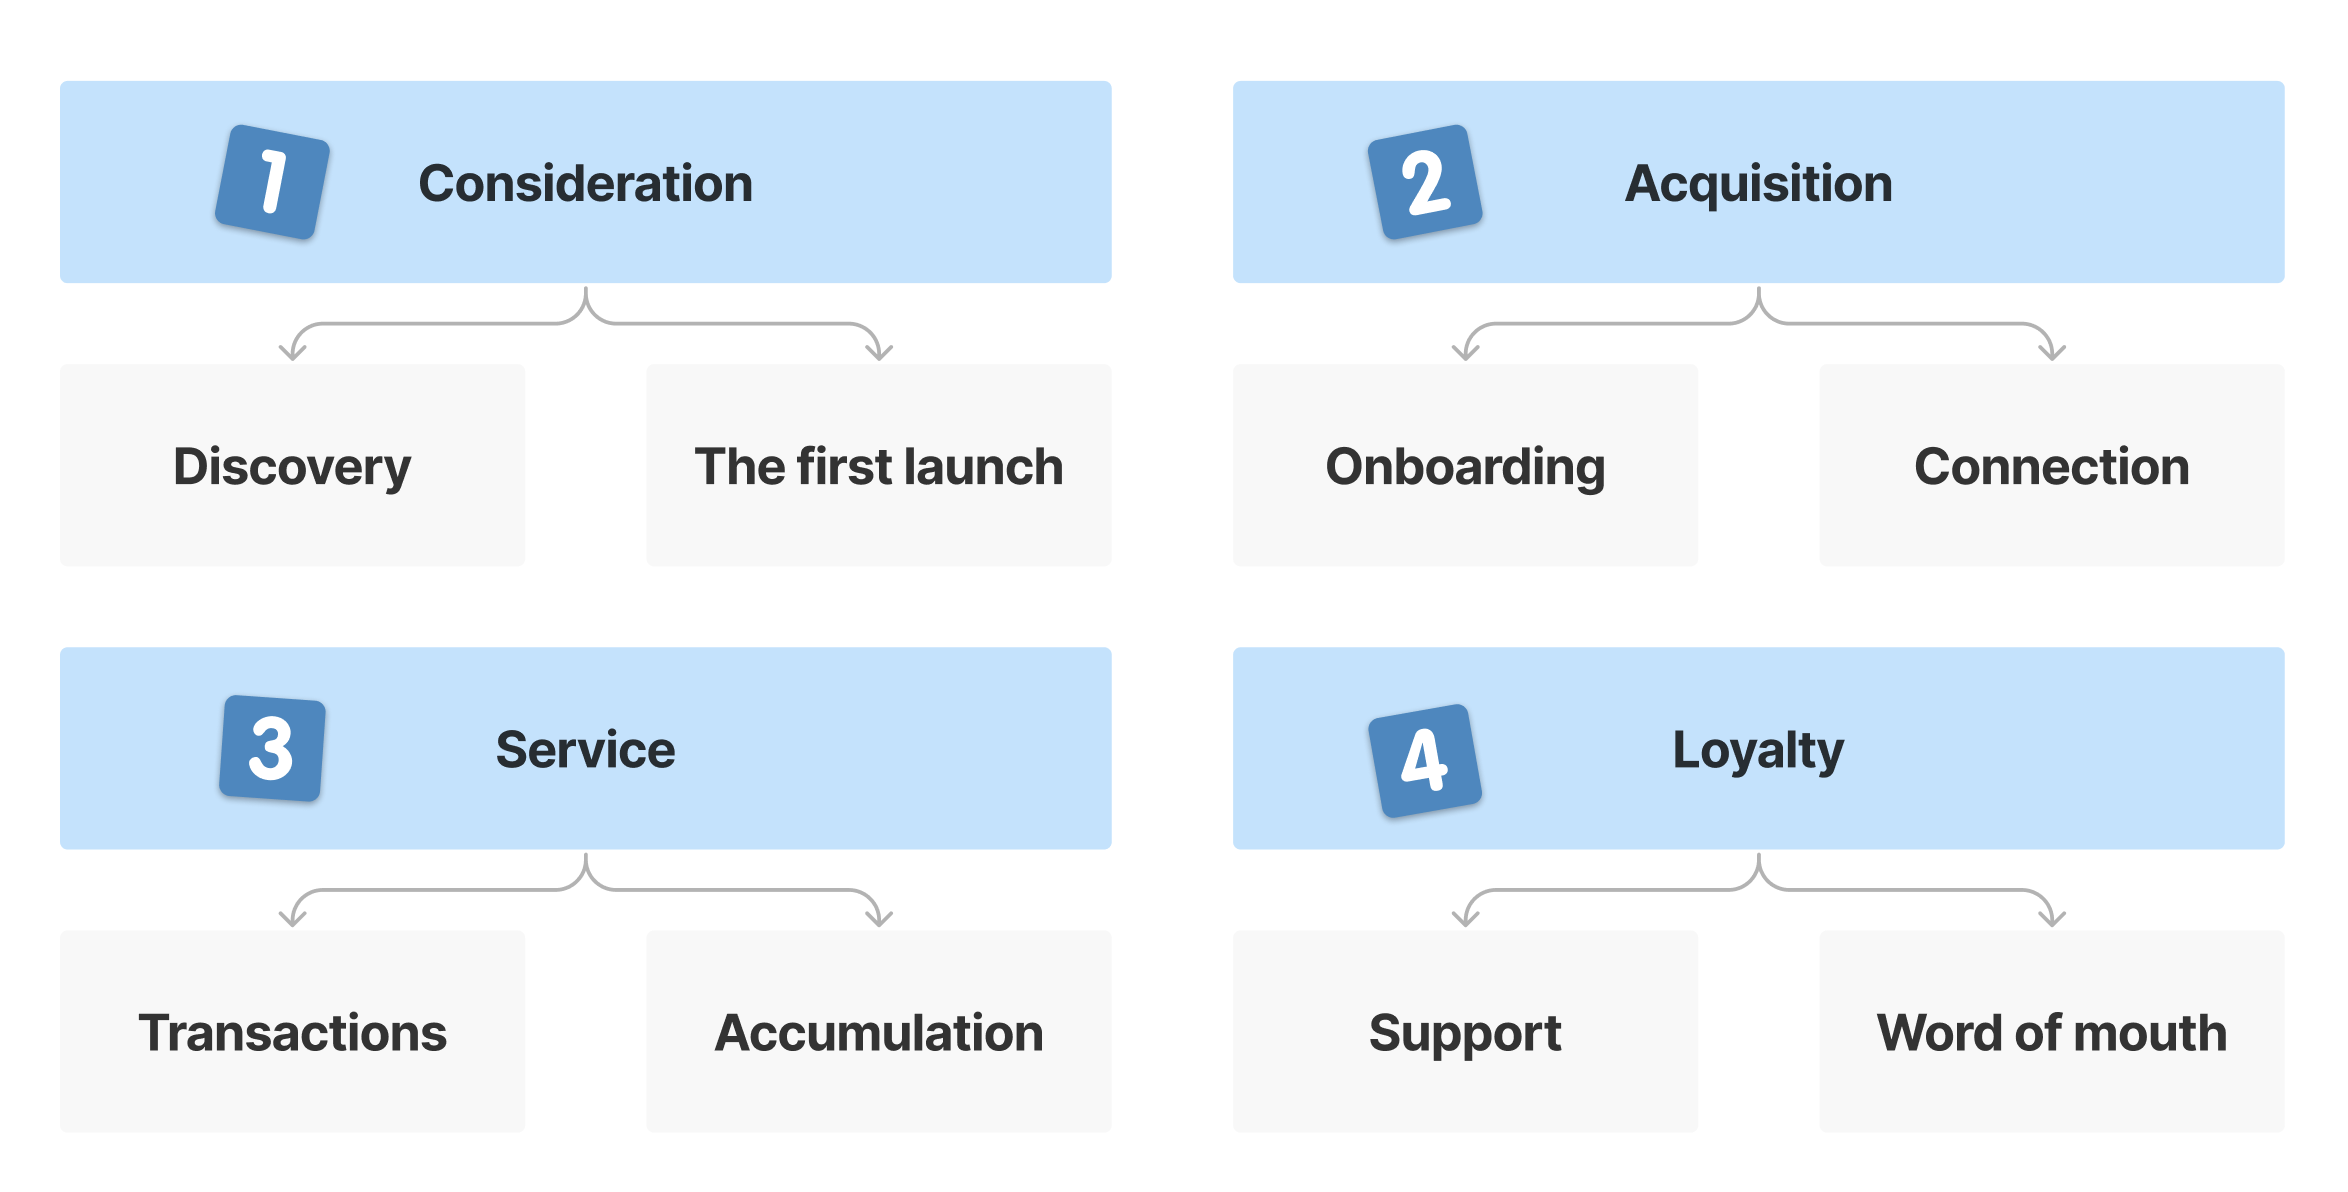 Four typical phases of a typical user journey